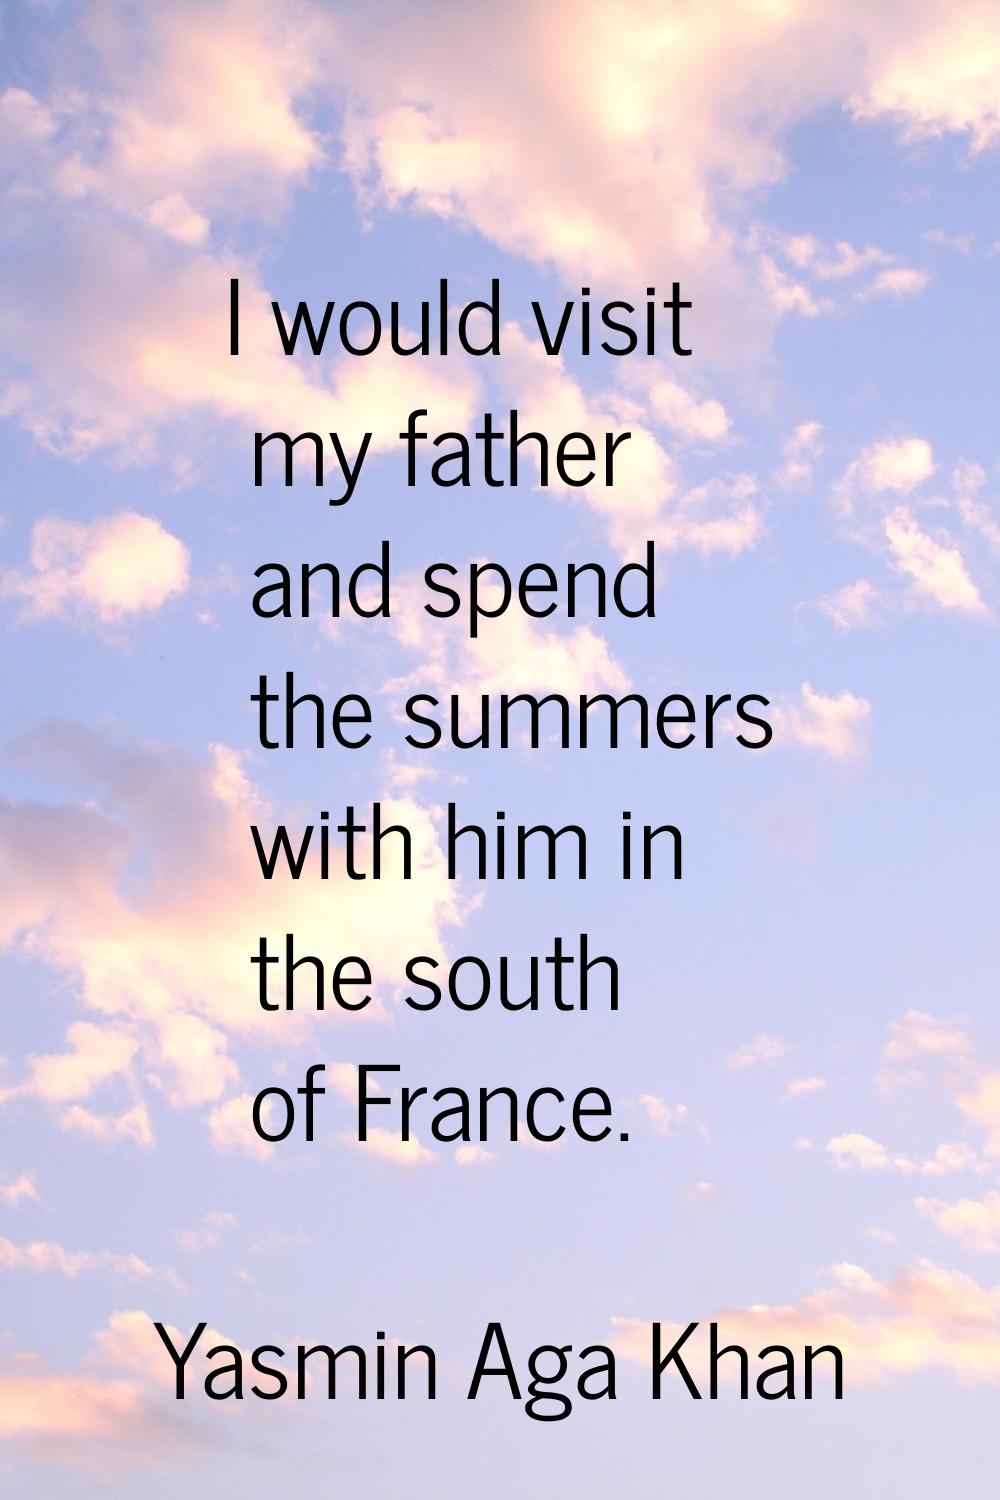 I would visit my father and spend the summers with him in the south of France.